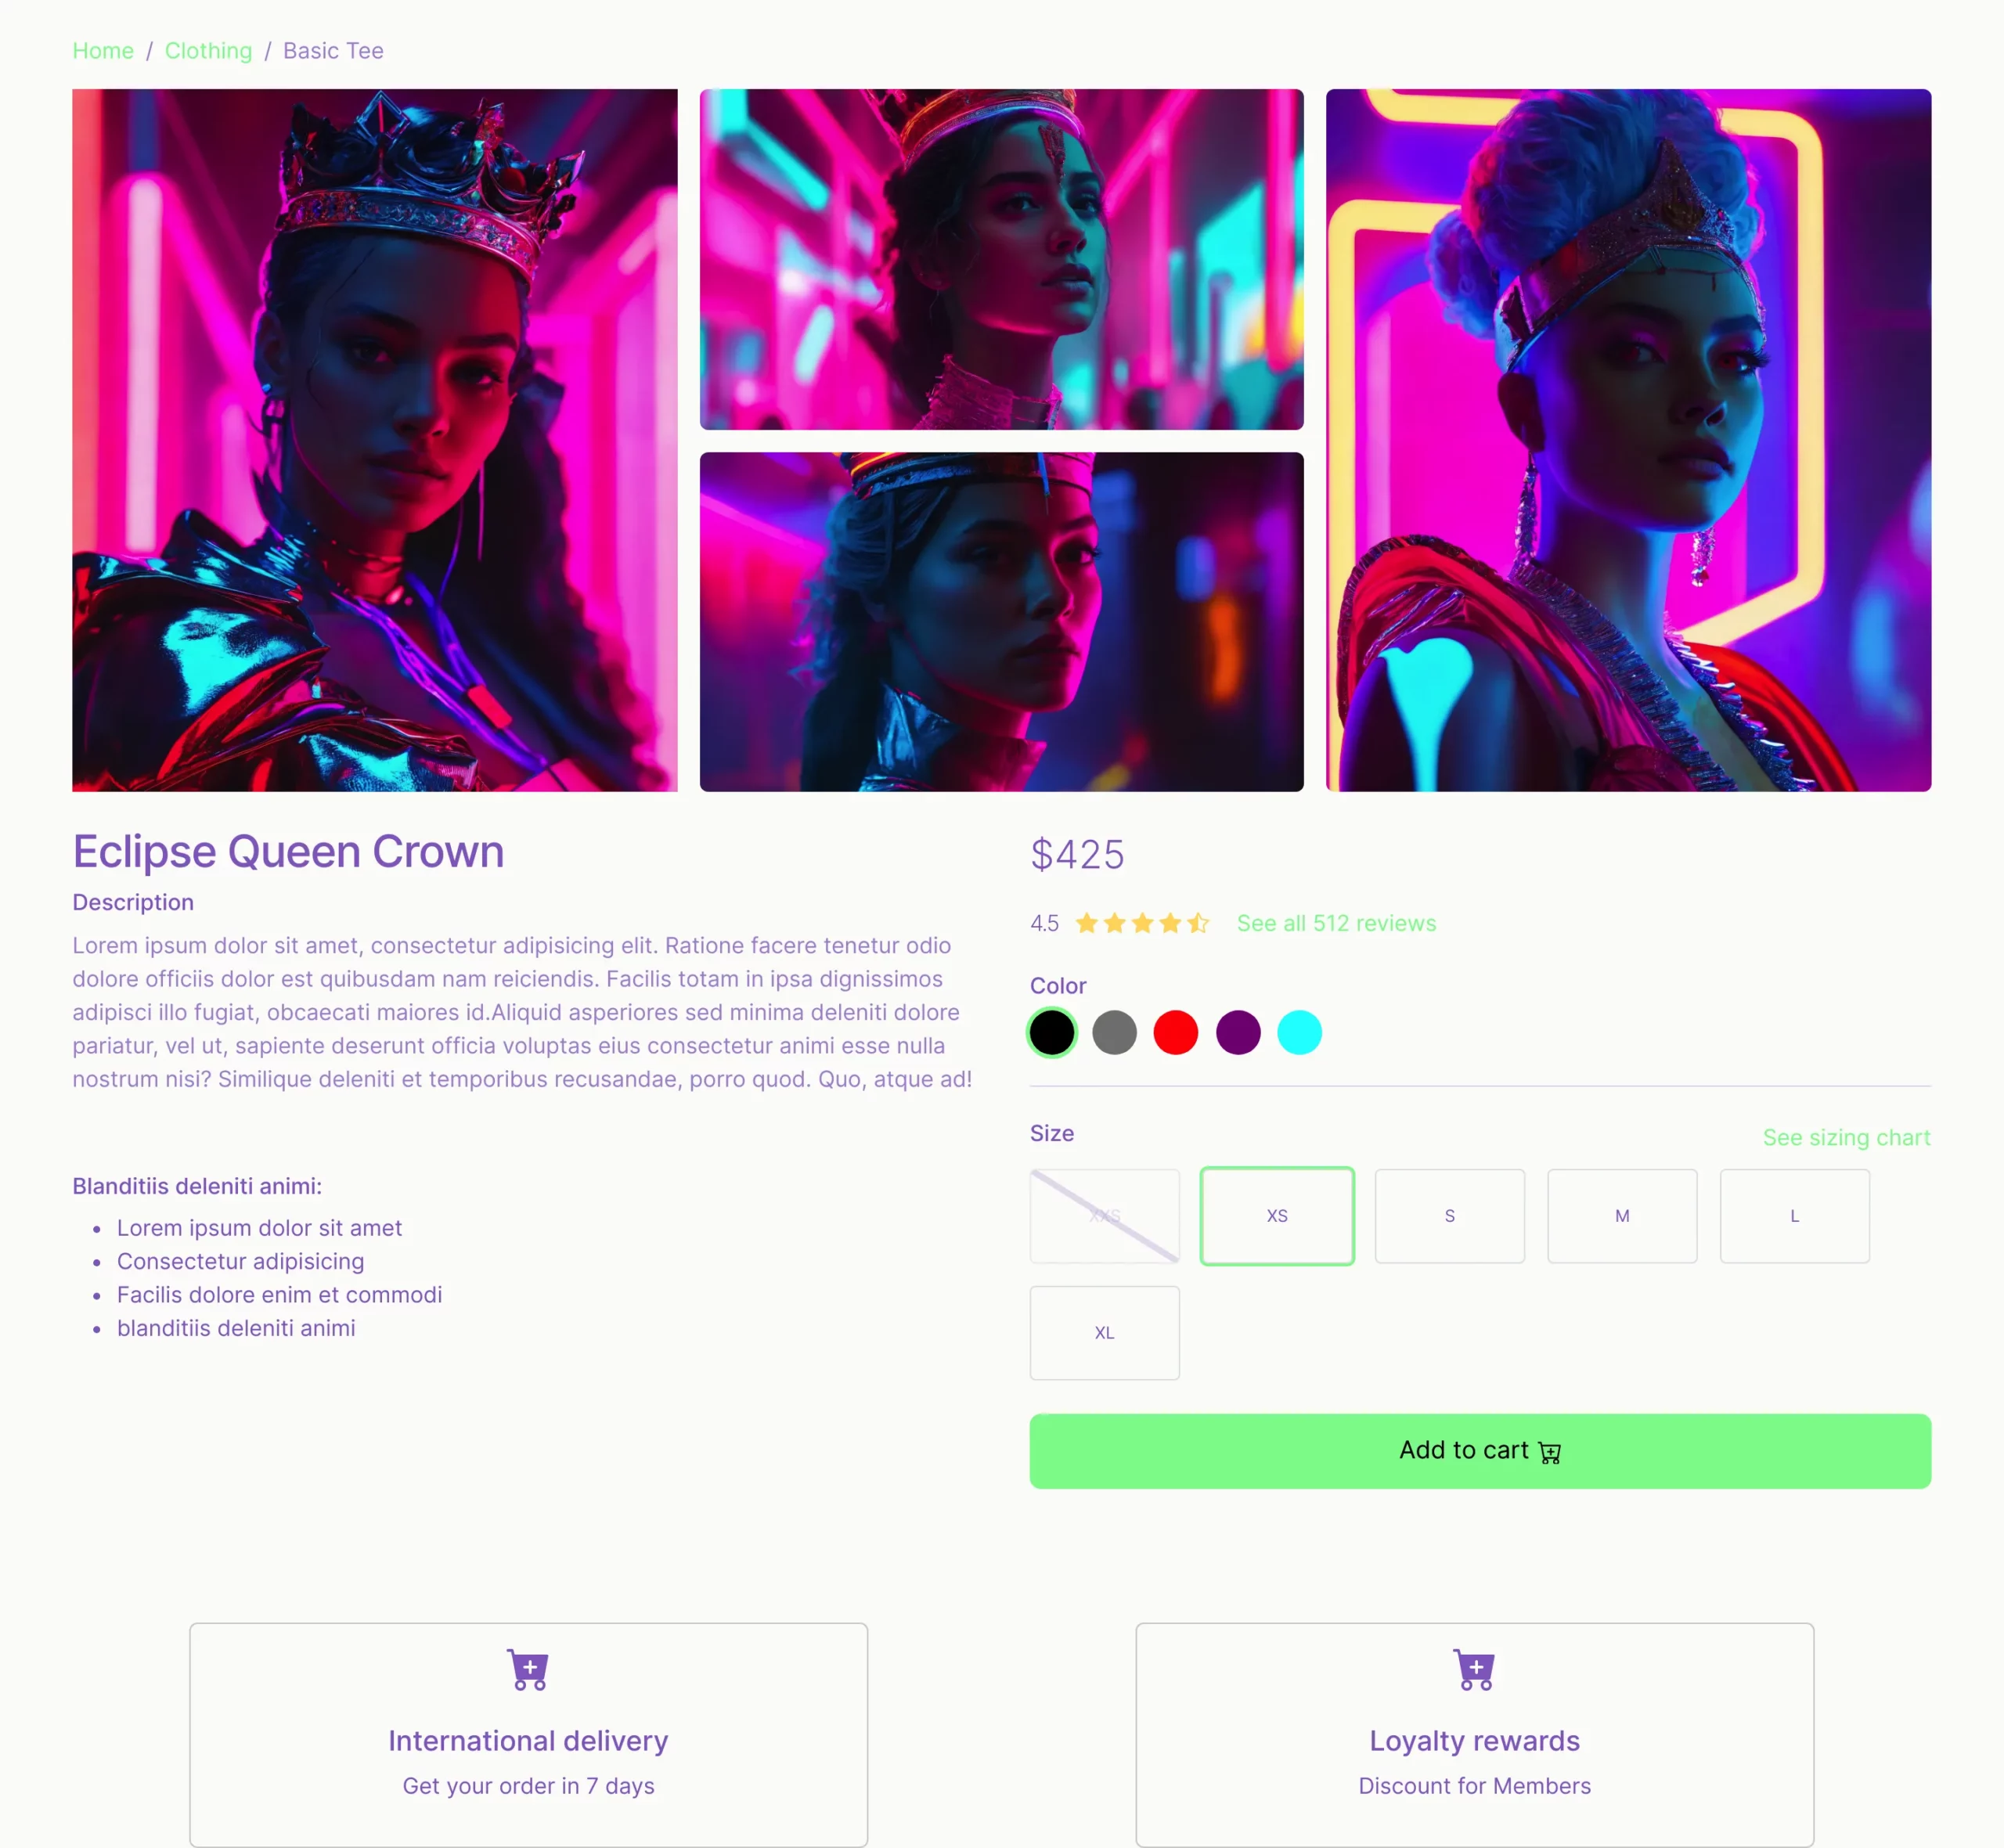 Product with image grid 2 Bootstrap 5 components